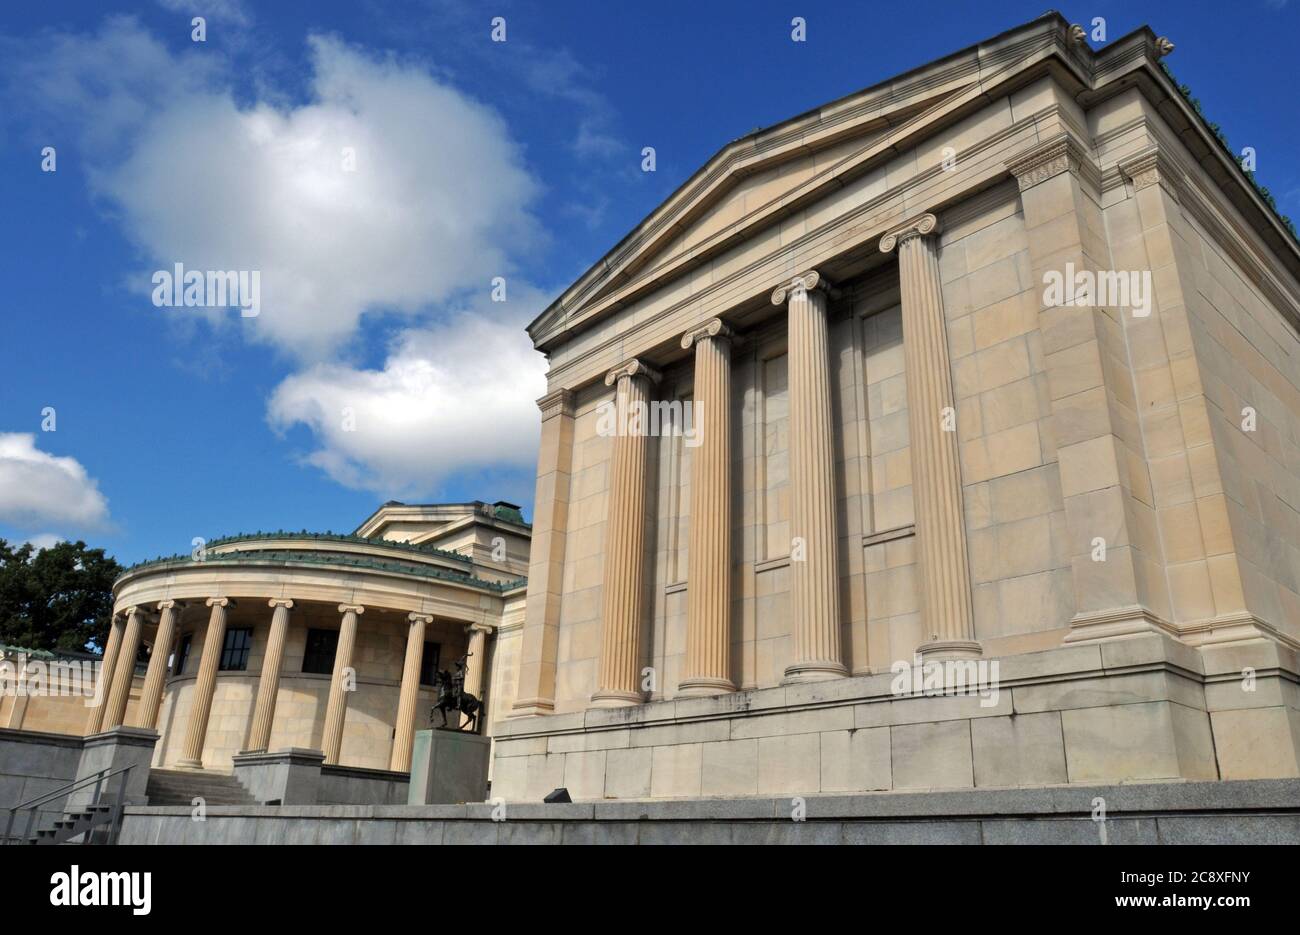 The neoclassical original building of the Albright-Knox Art Gallery in Buffalo was designed by architect E.B. Green and opened in 1905. Stock Photo